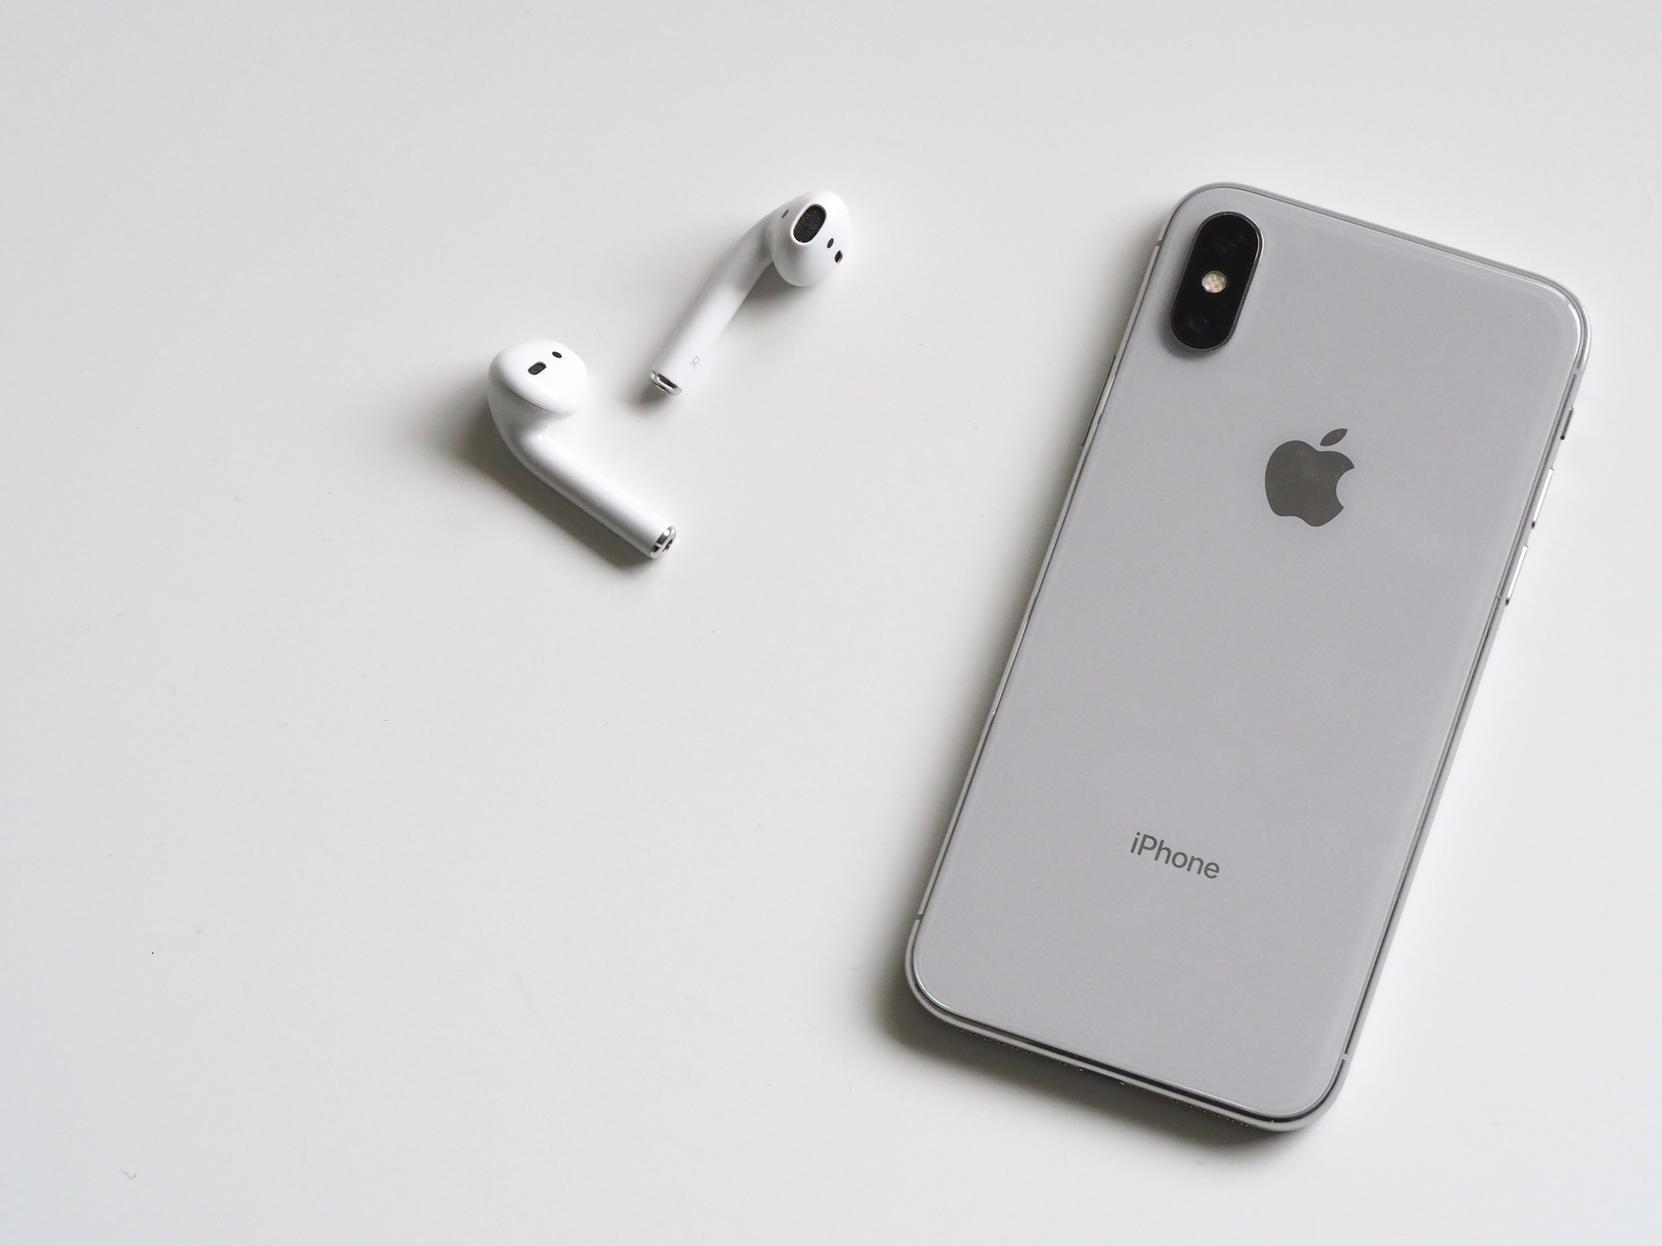 AirPods are the wireless earphones you'll see in most ears on the commute each day and their rise has coincided with the tech industry's move towards wireless audio and earphones.